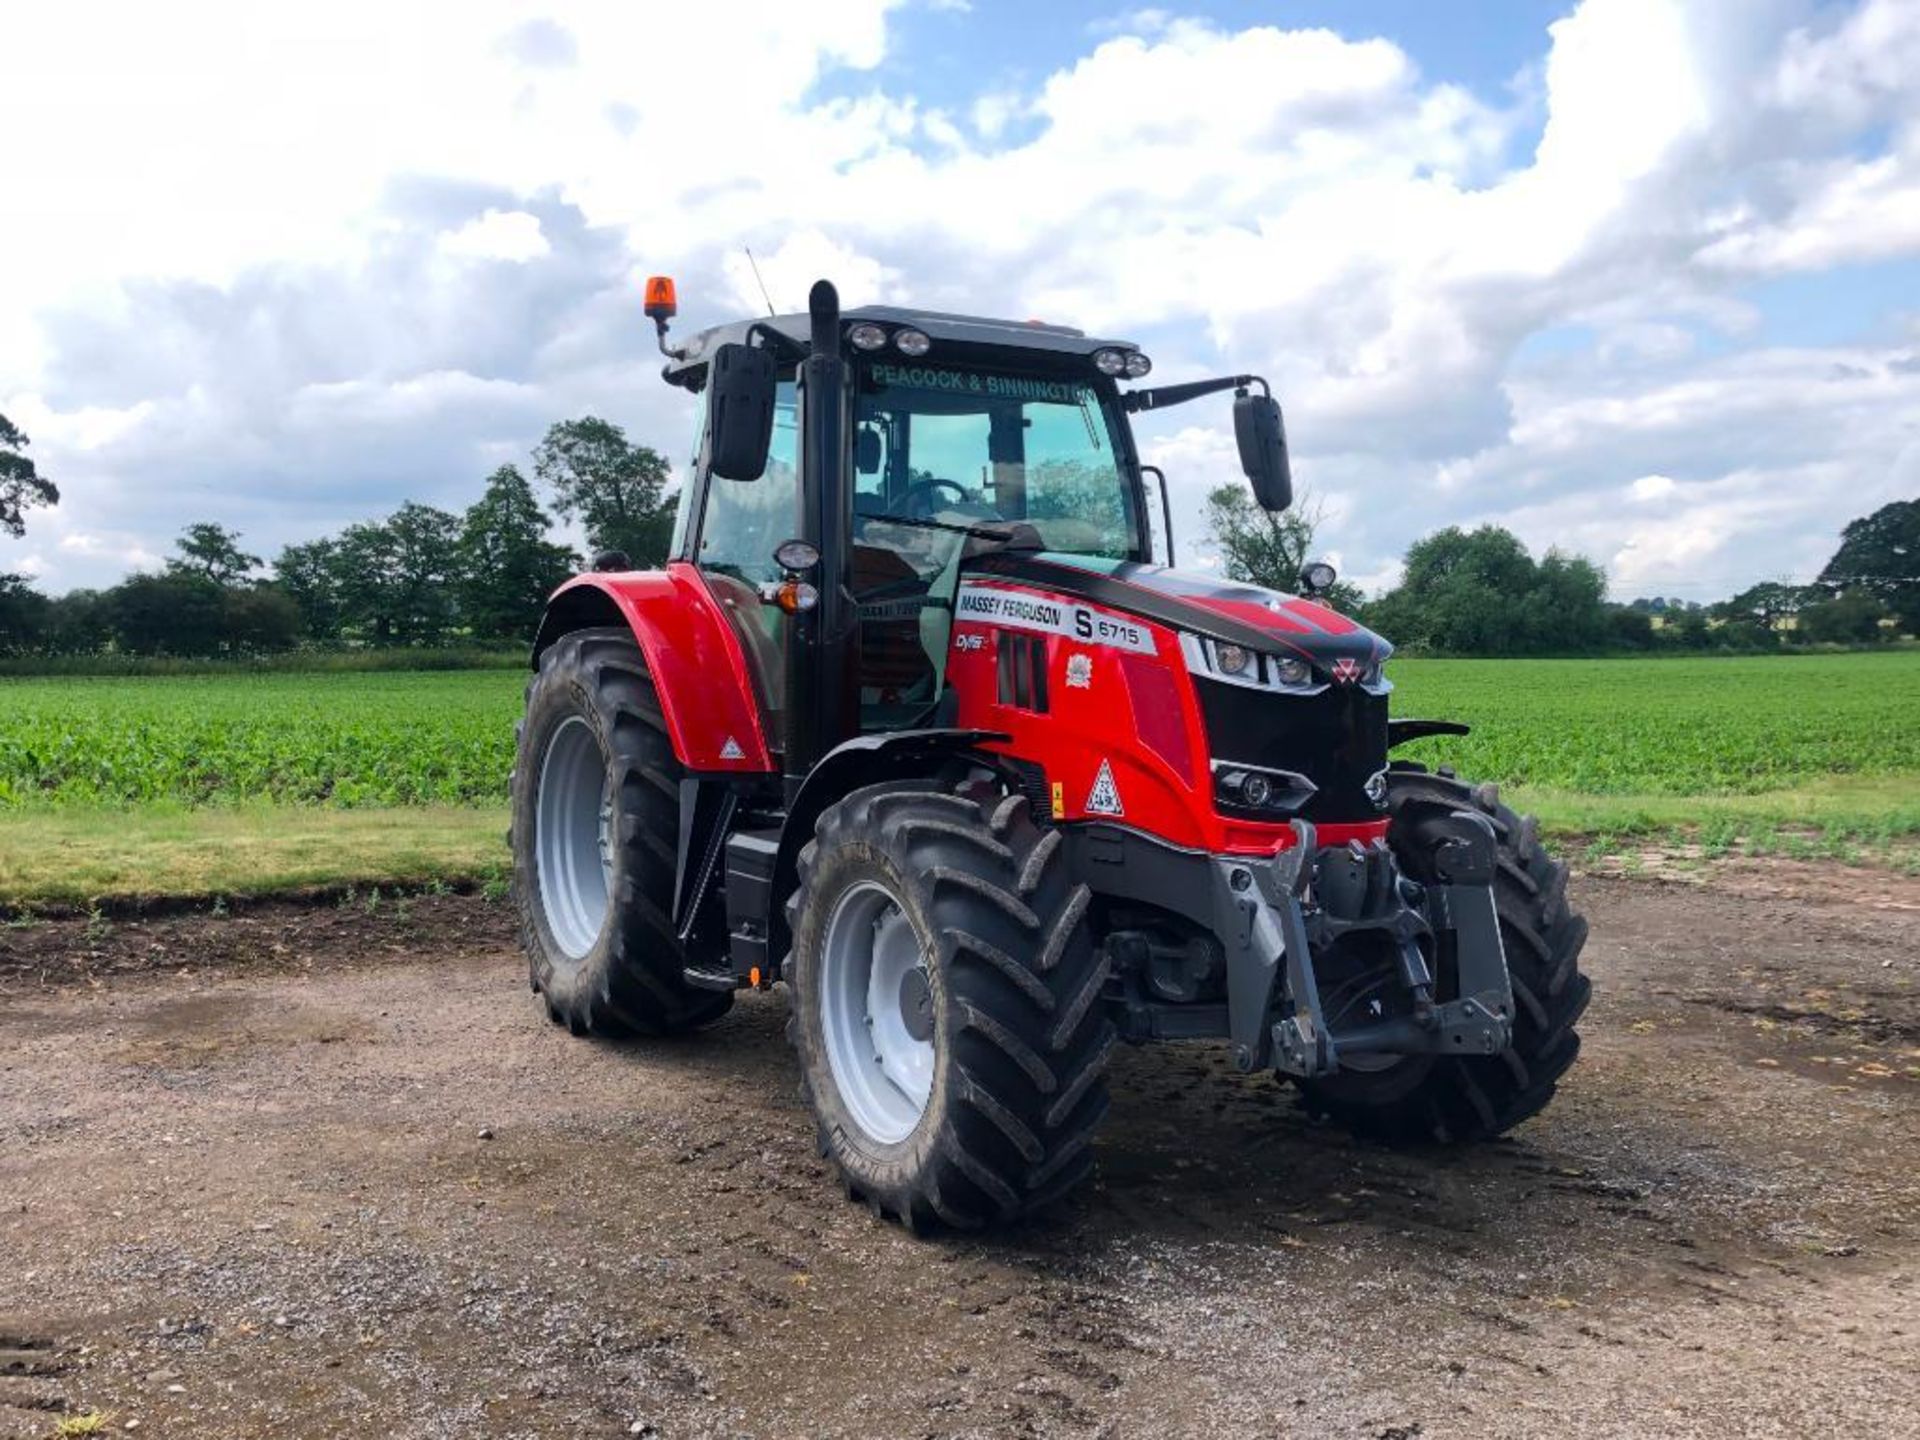 2019 Massey Ferguson 6715 S Dyna 6 50kph 4wd tractor c/w 3 manual spools, front linkage, air brakes, - Image 35 of 41